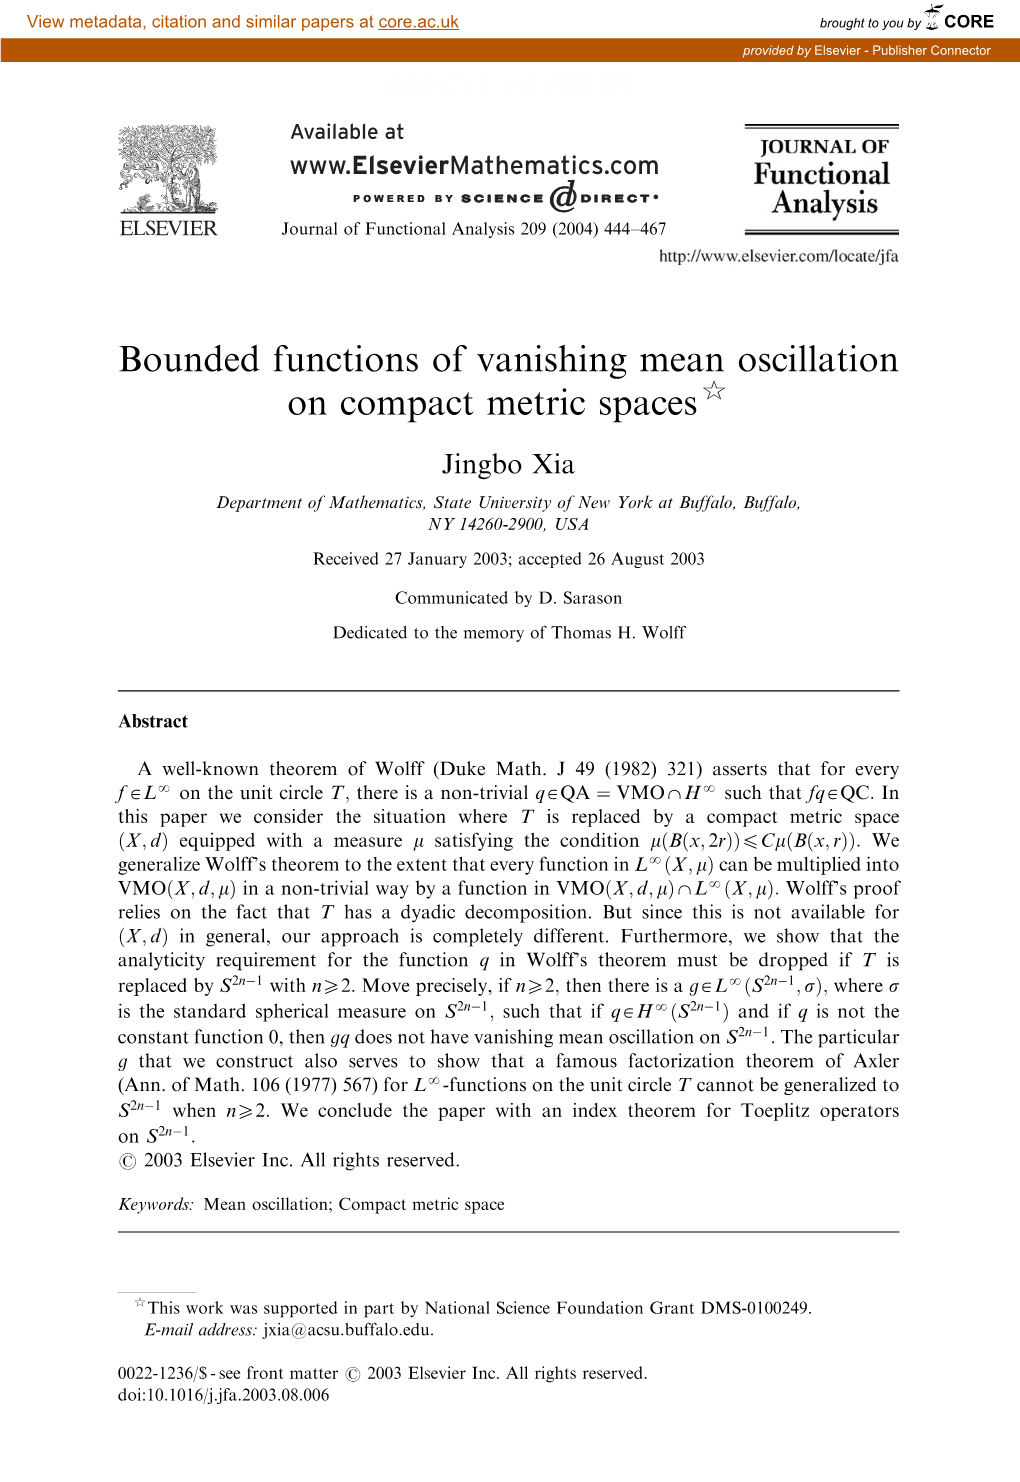 Bounded Functions of Vanishing Mean Oscillation on Compact Metric Spaces$